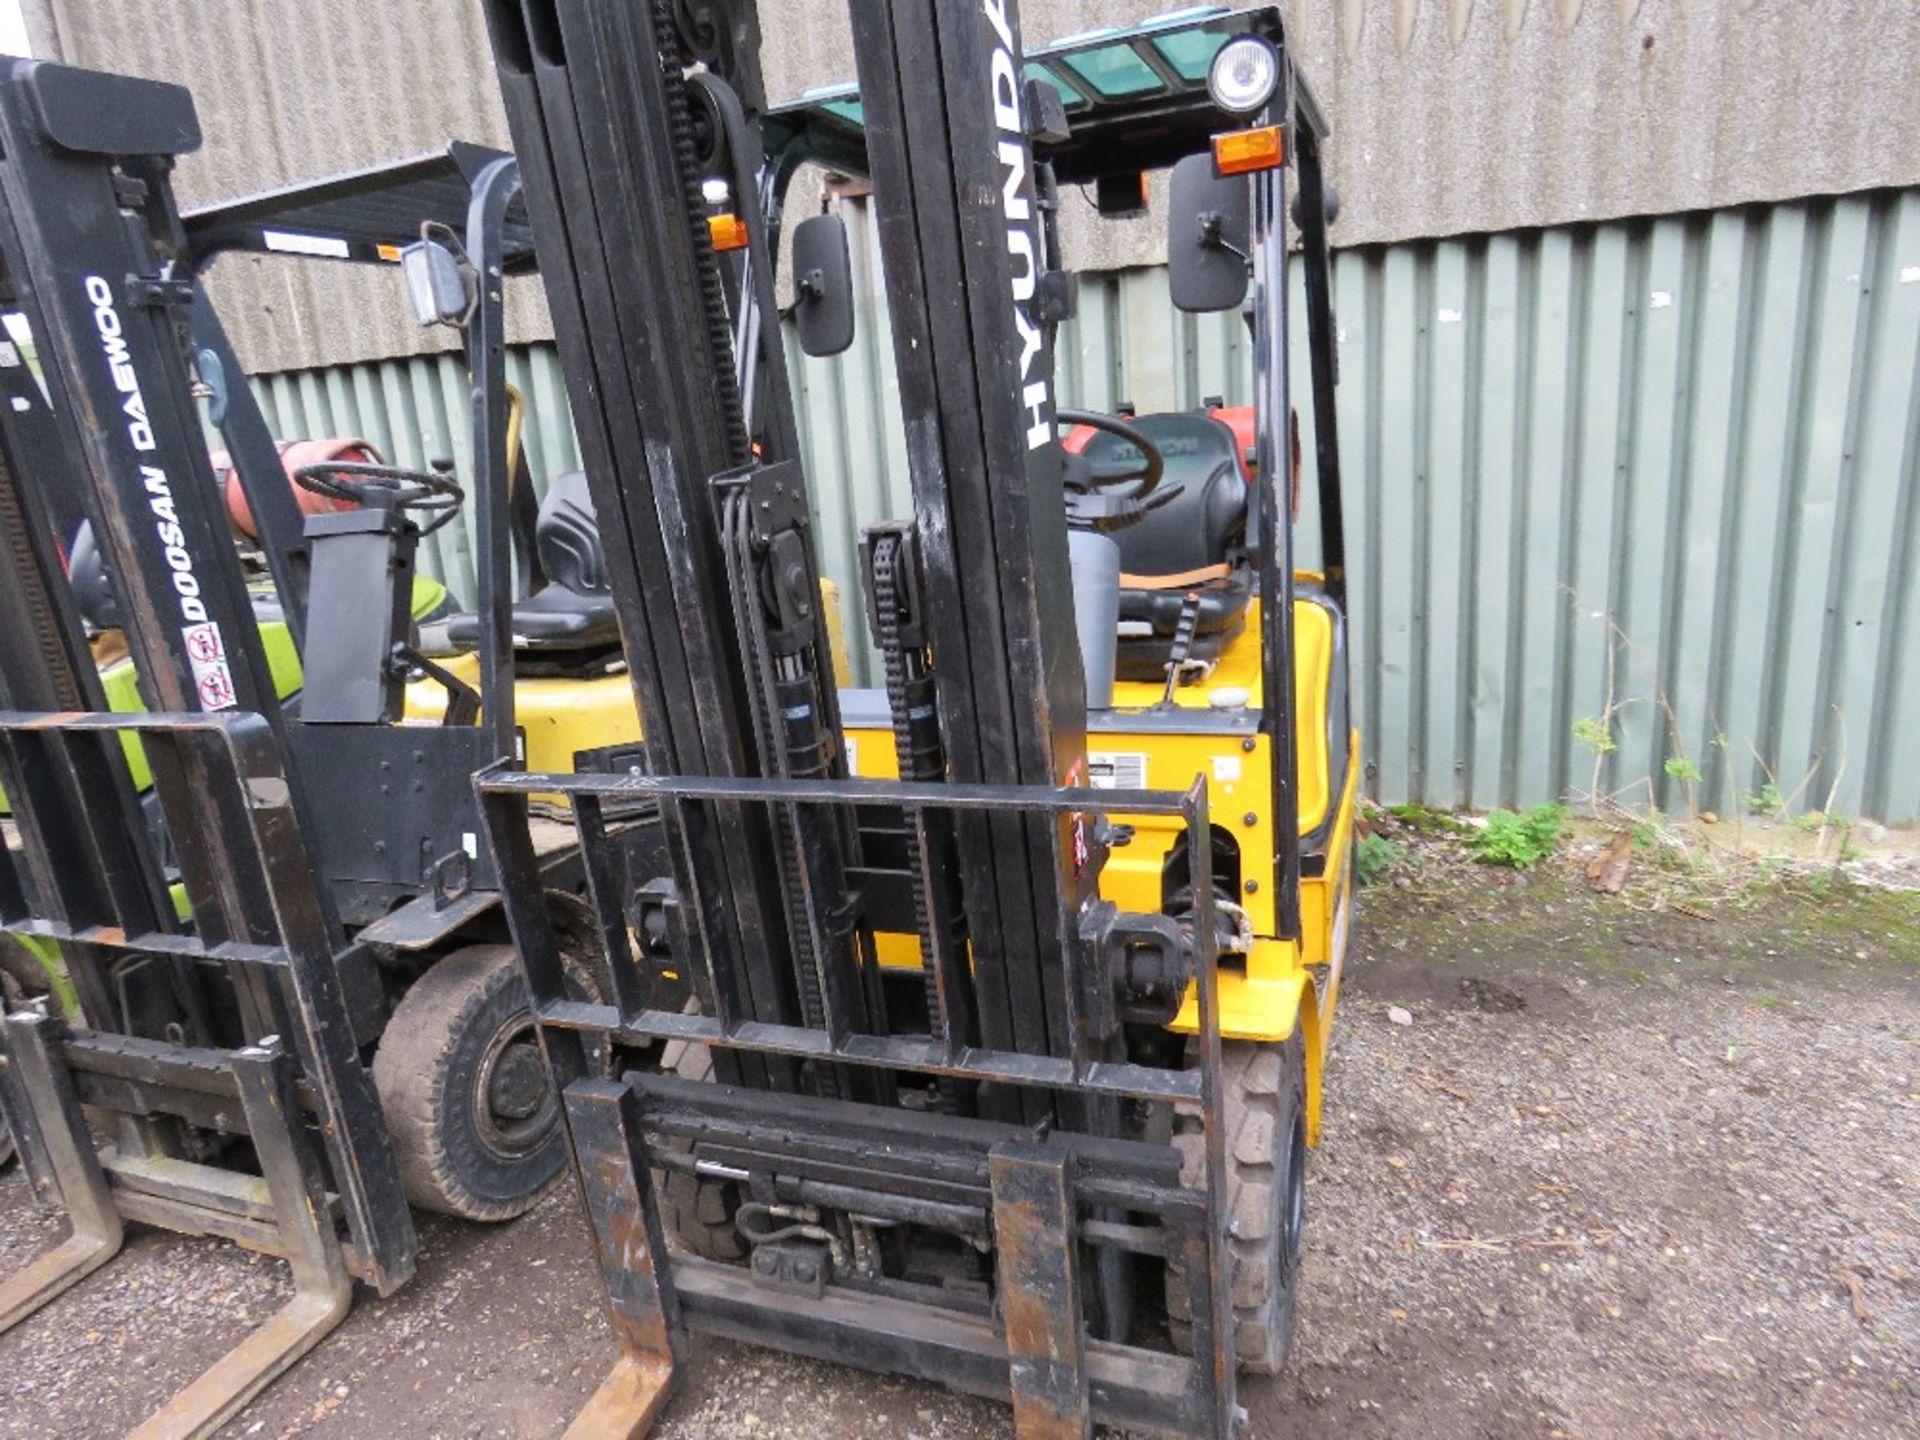 HYUNDAI 20L-7M GAS POWERED FORKLIFT TRUCK, YEAR 2018. 1600 REC HOURS APPROX. EXTRA SERVICE. - Image 2 of 11